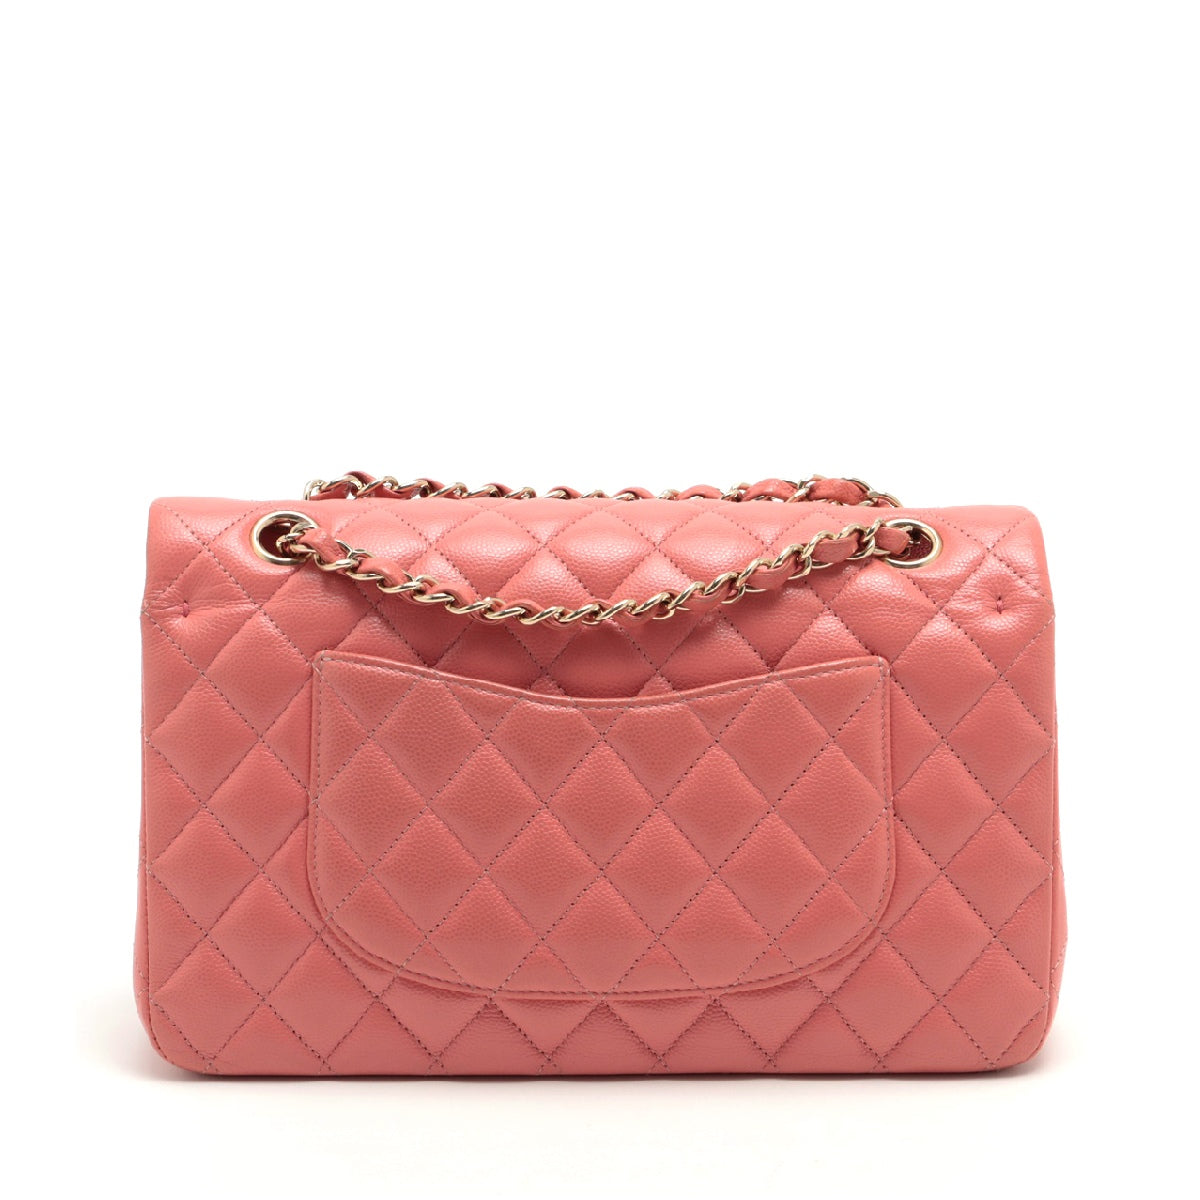 Chanel Matelasse Caviarskin Double flap Double chain bag Pink Gold Metal fittings 28th